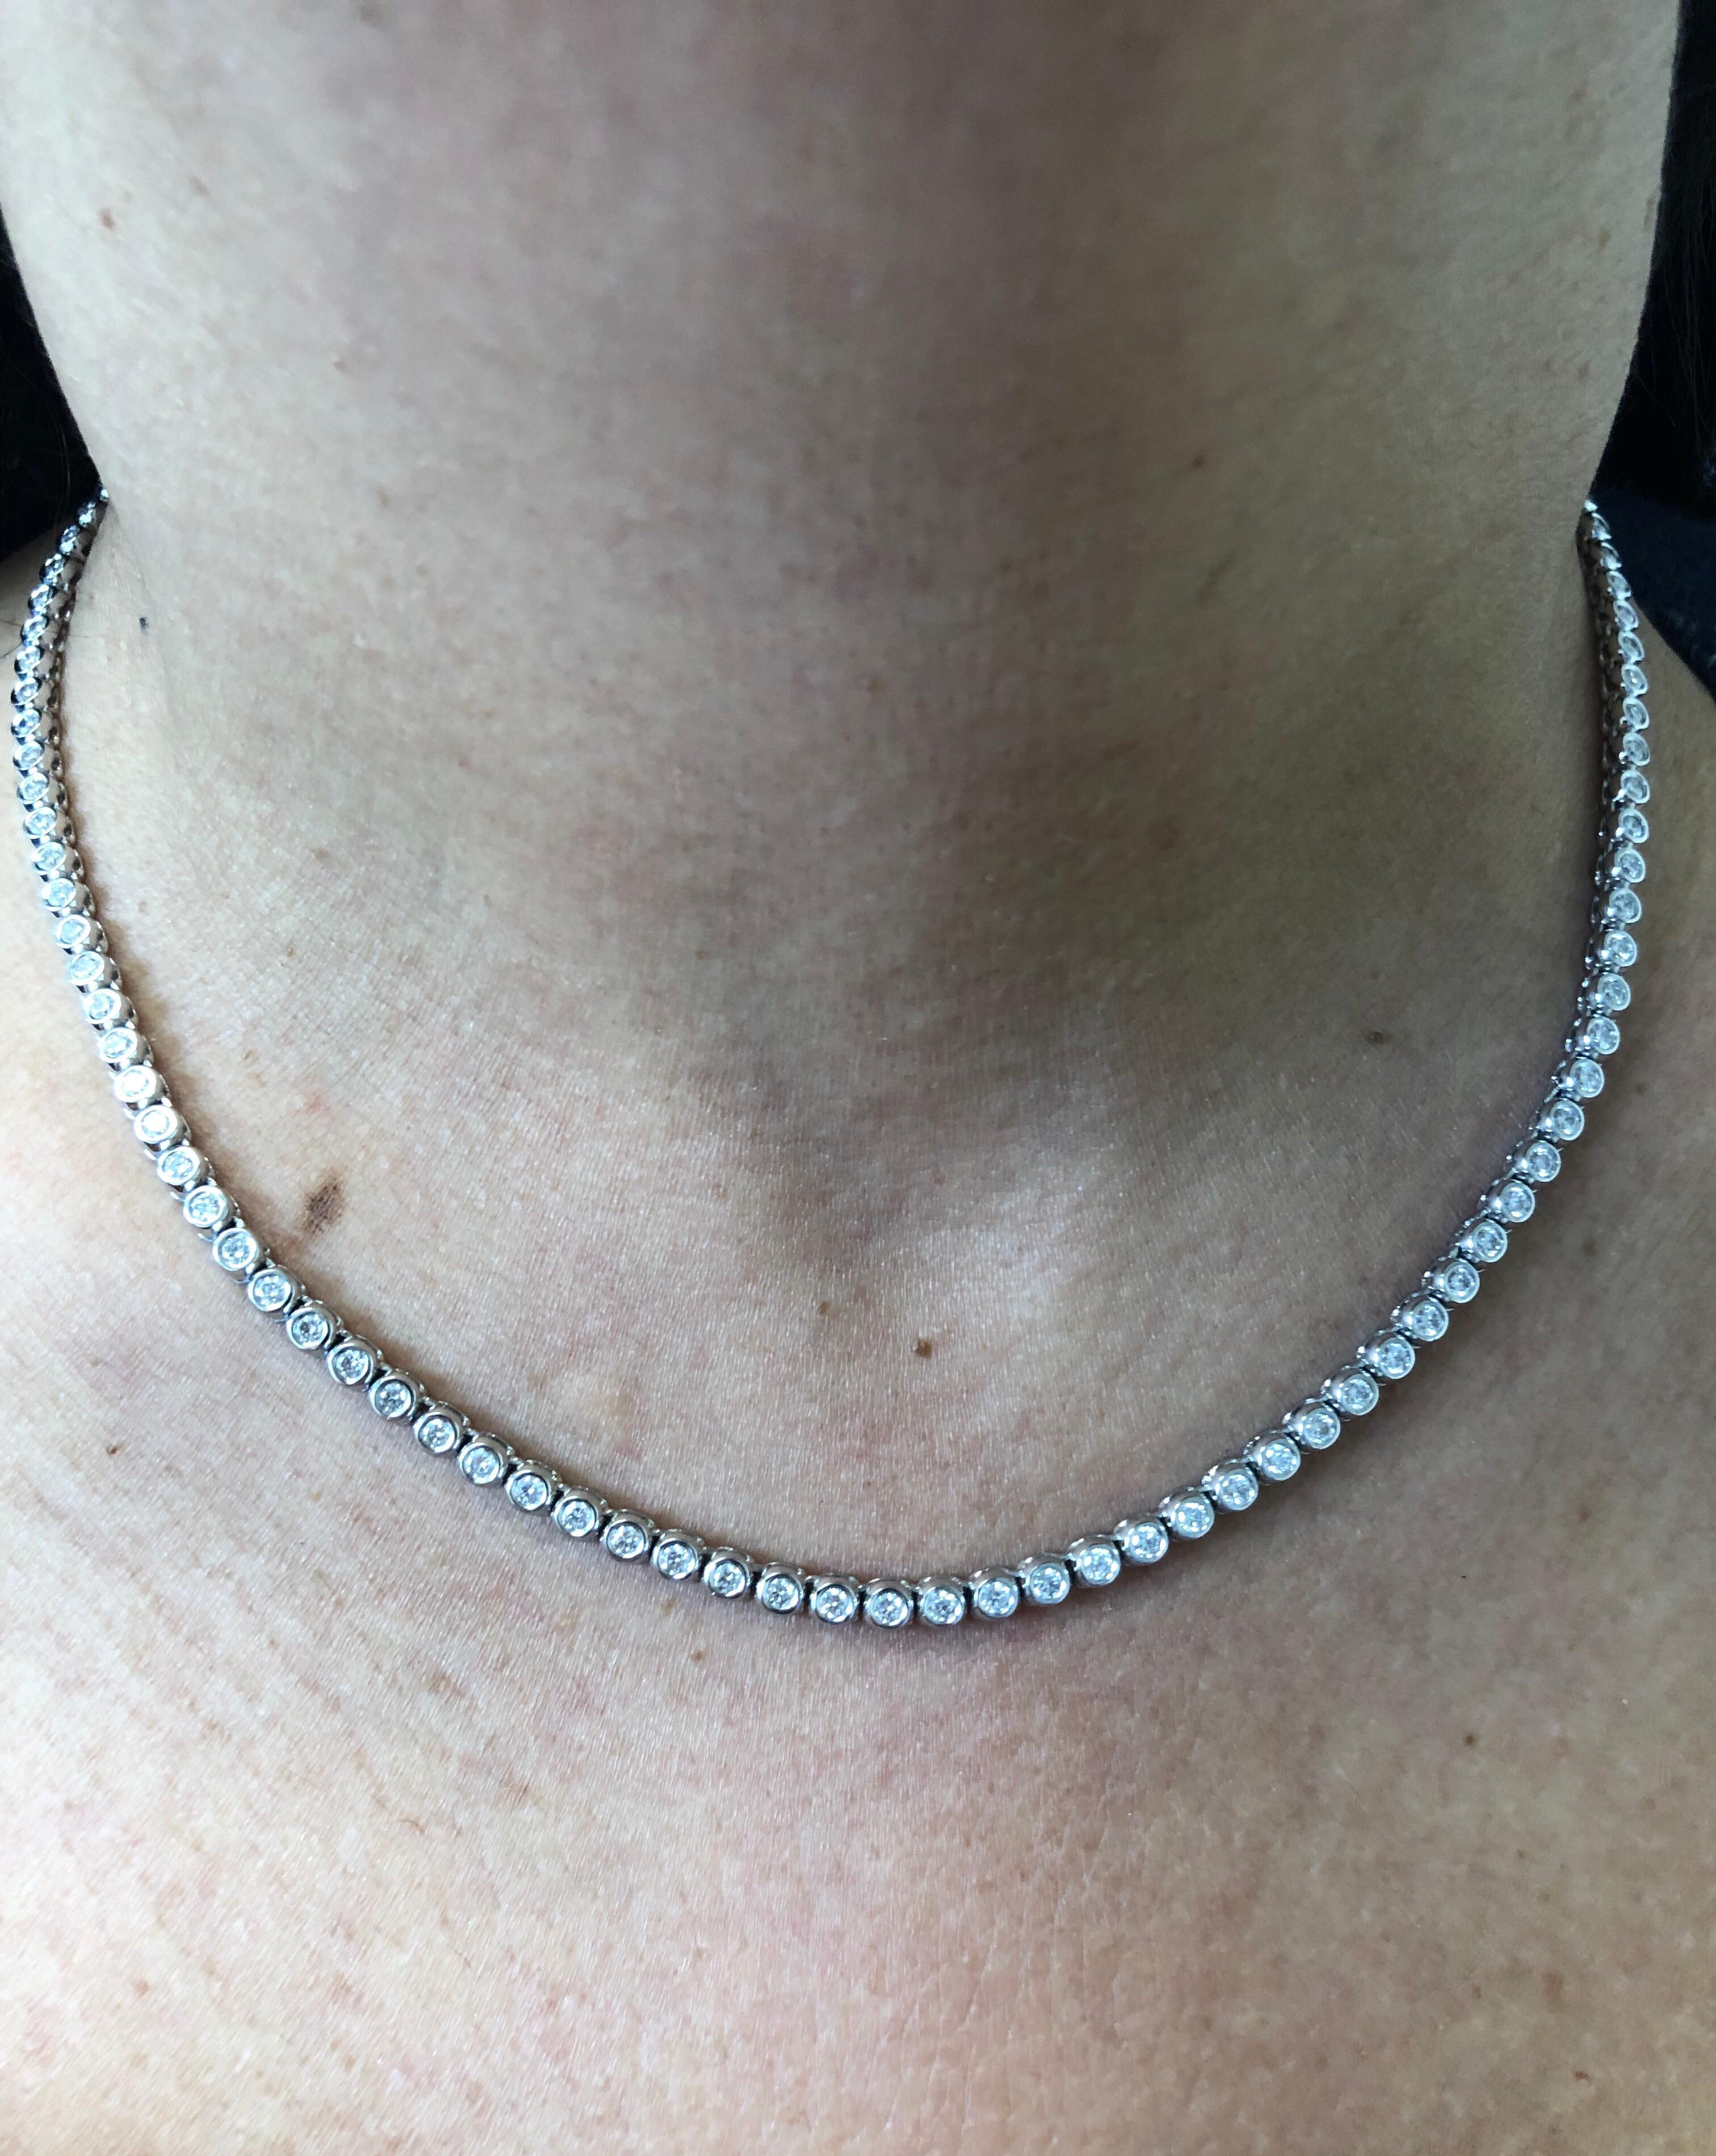 Bezel set diamond necklace 17 inch set with 5 points of diamonds each stone. The diamond necklace is set in 14K white gold. The total weight of the necklace is 5.09 carats. The stones are G-H color, the clarity is SI1.